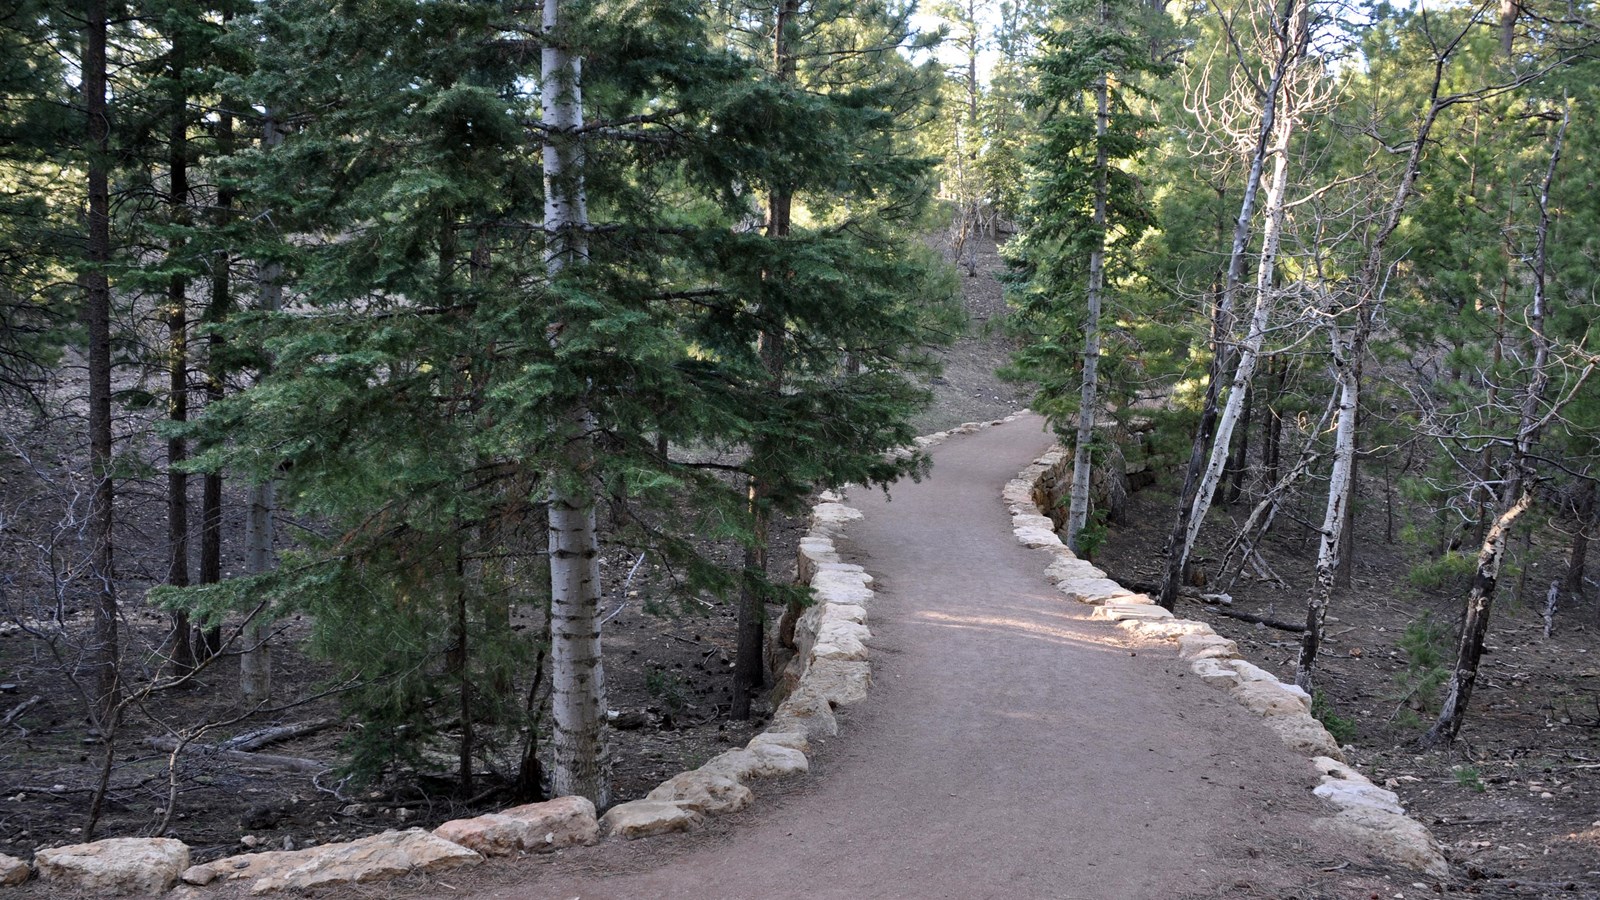 A flat, hard-packed trail bordered on either side by rocks winds through a pine and aspen forest.